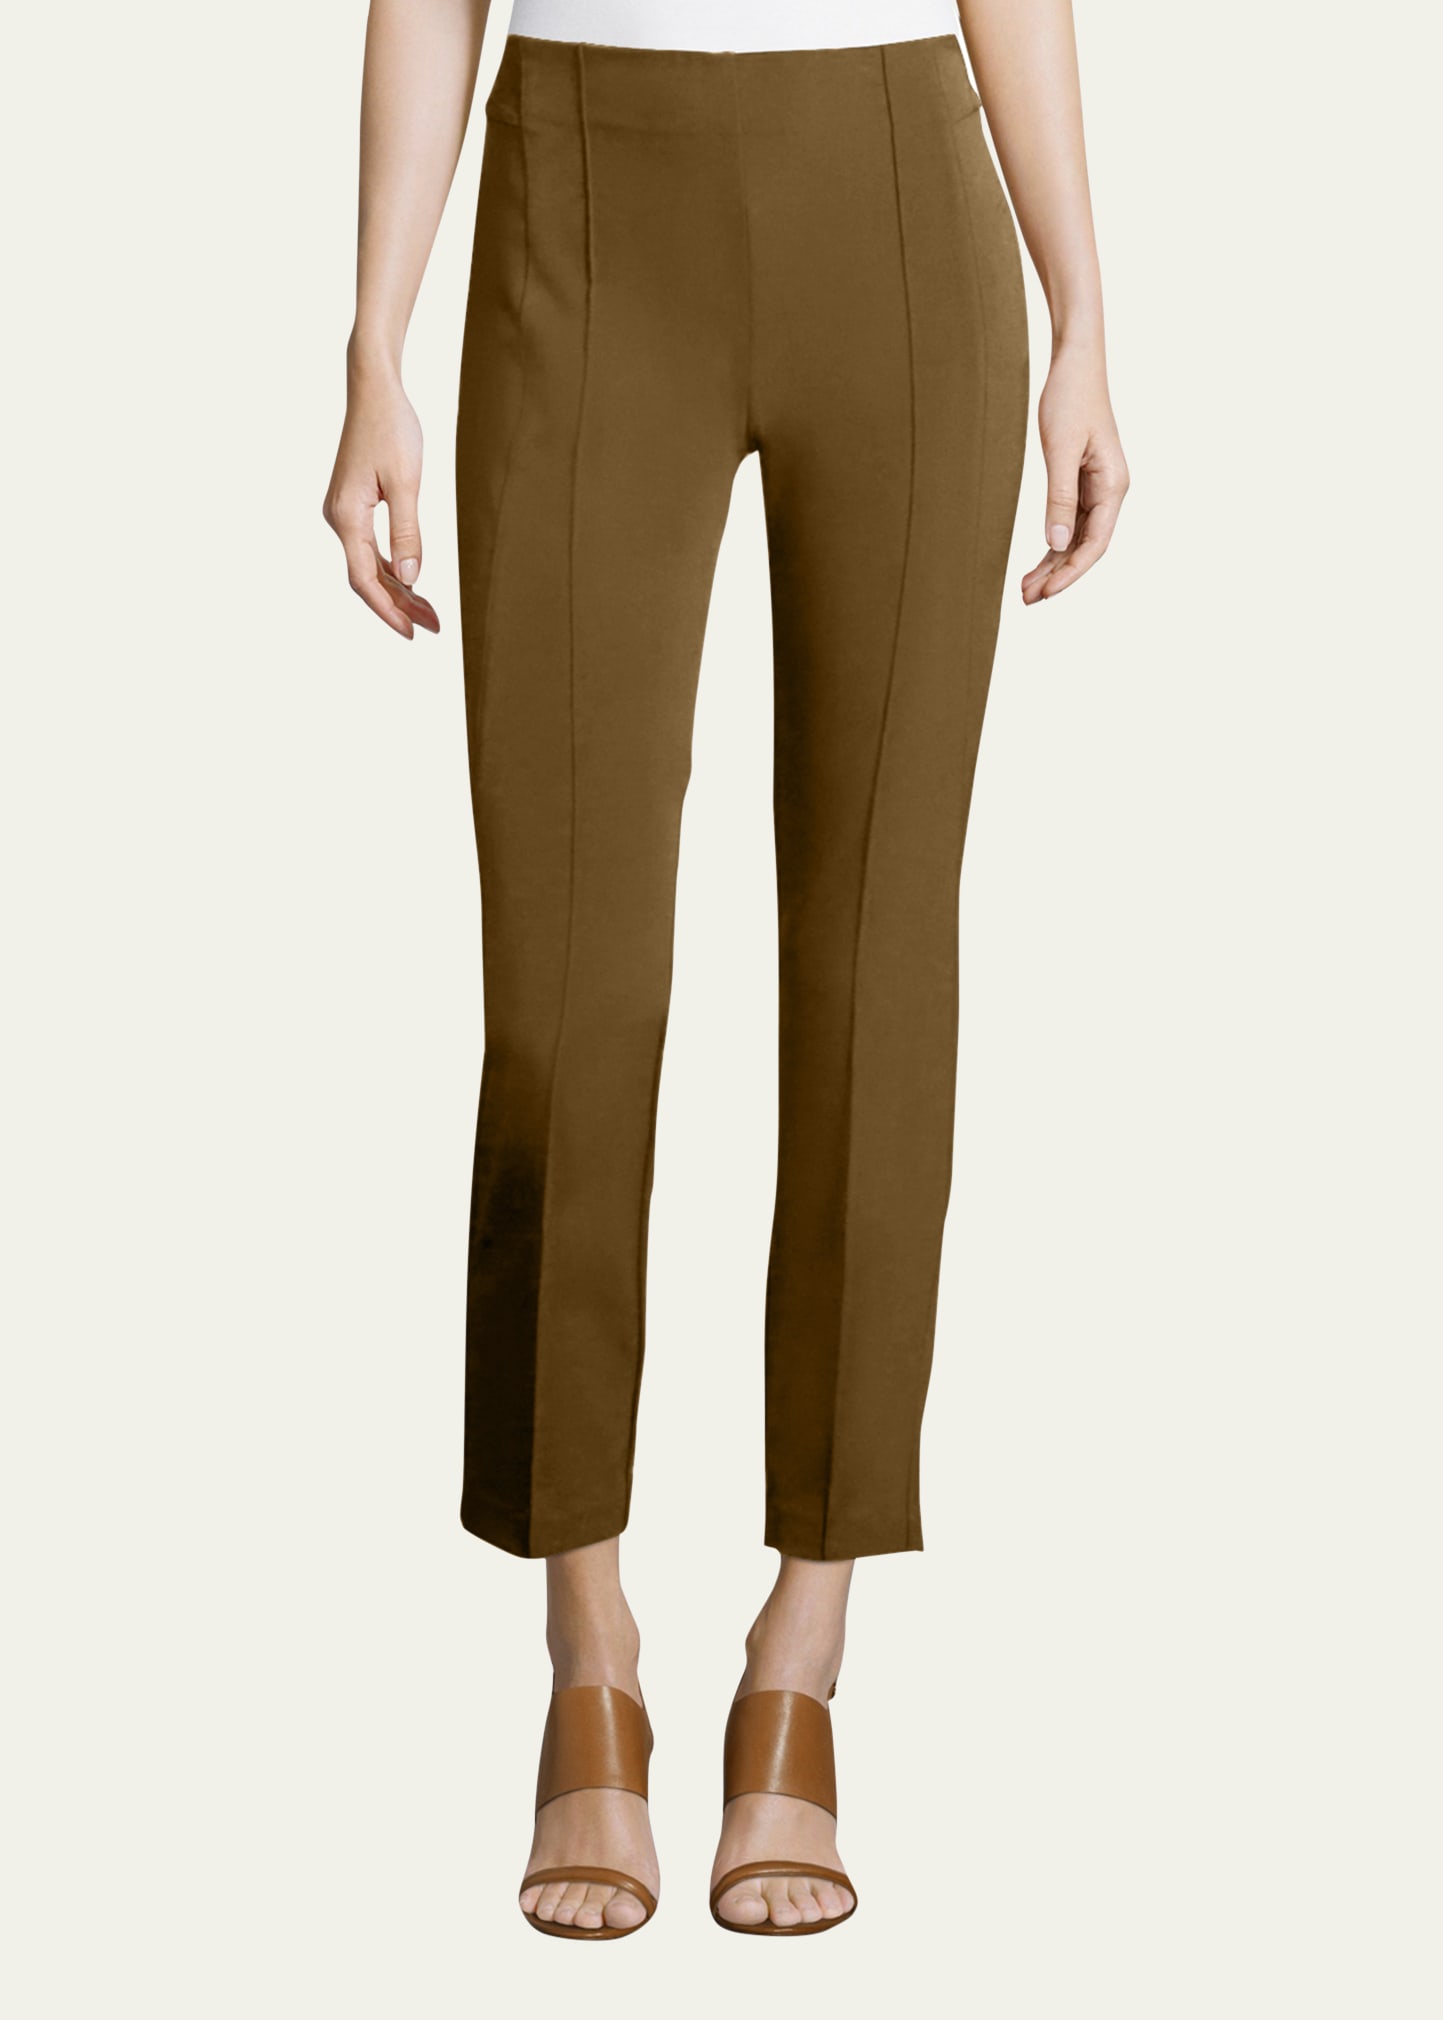 Lafayette 148 Gramercy Acclaimed-stretch Pants In Damaged-cammello